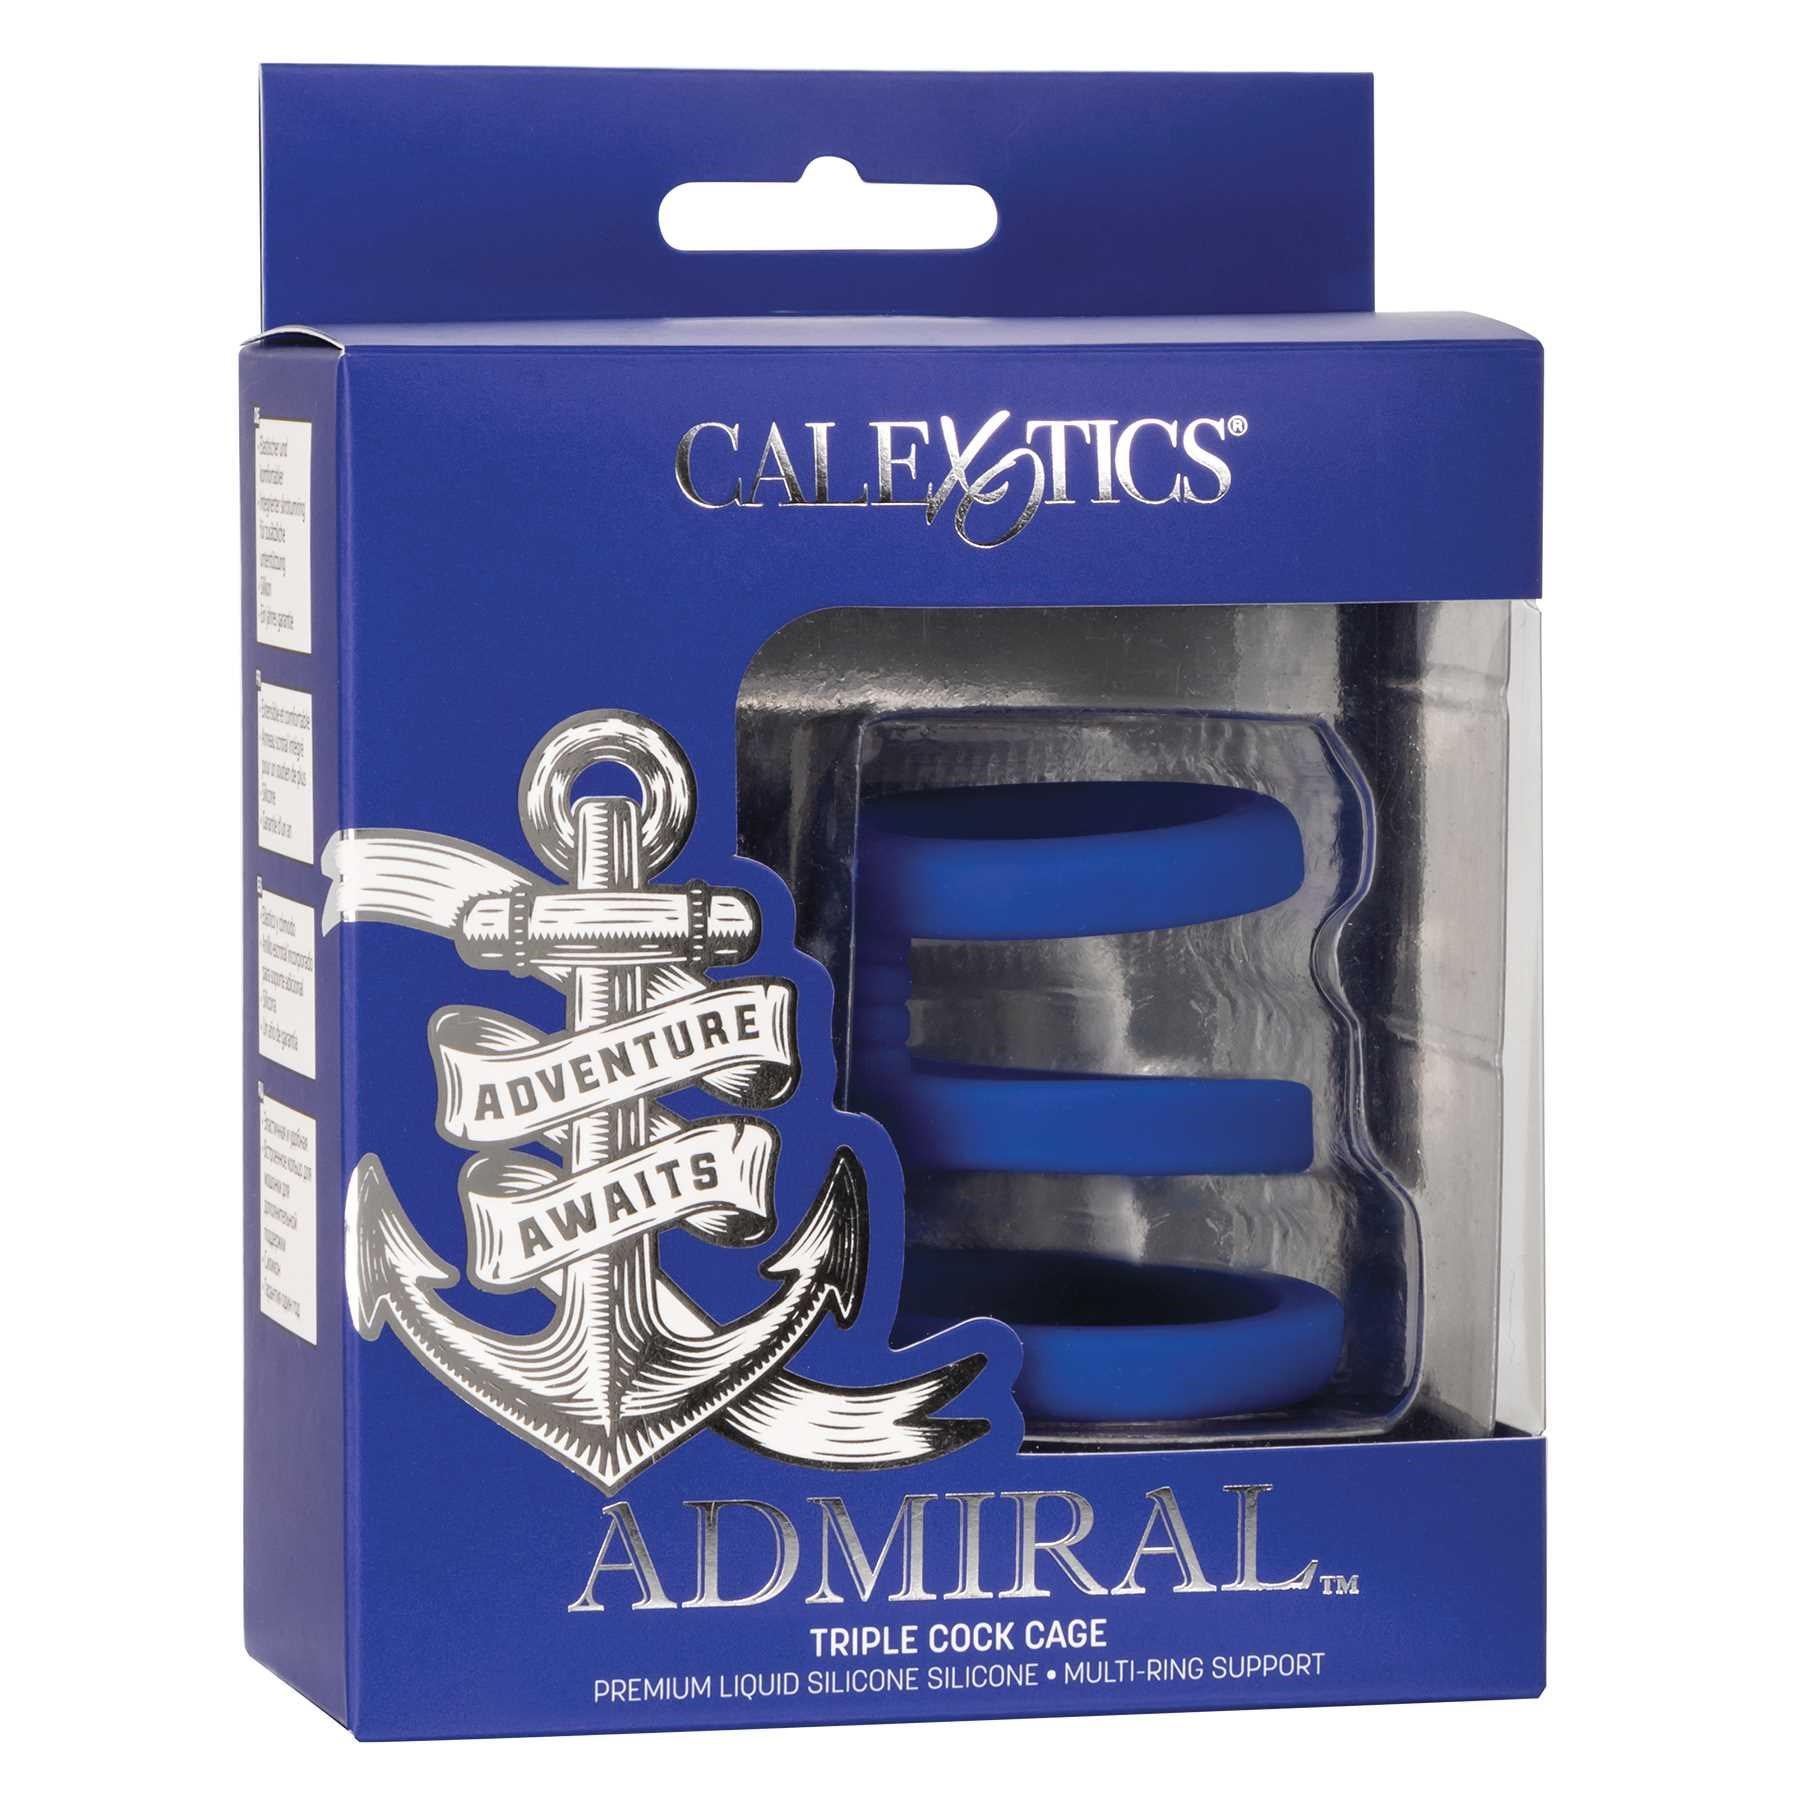 Admiral Triple Cock Cage packaging